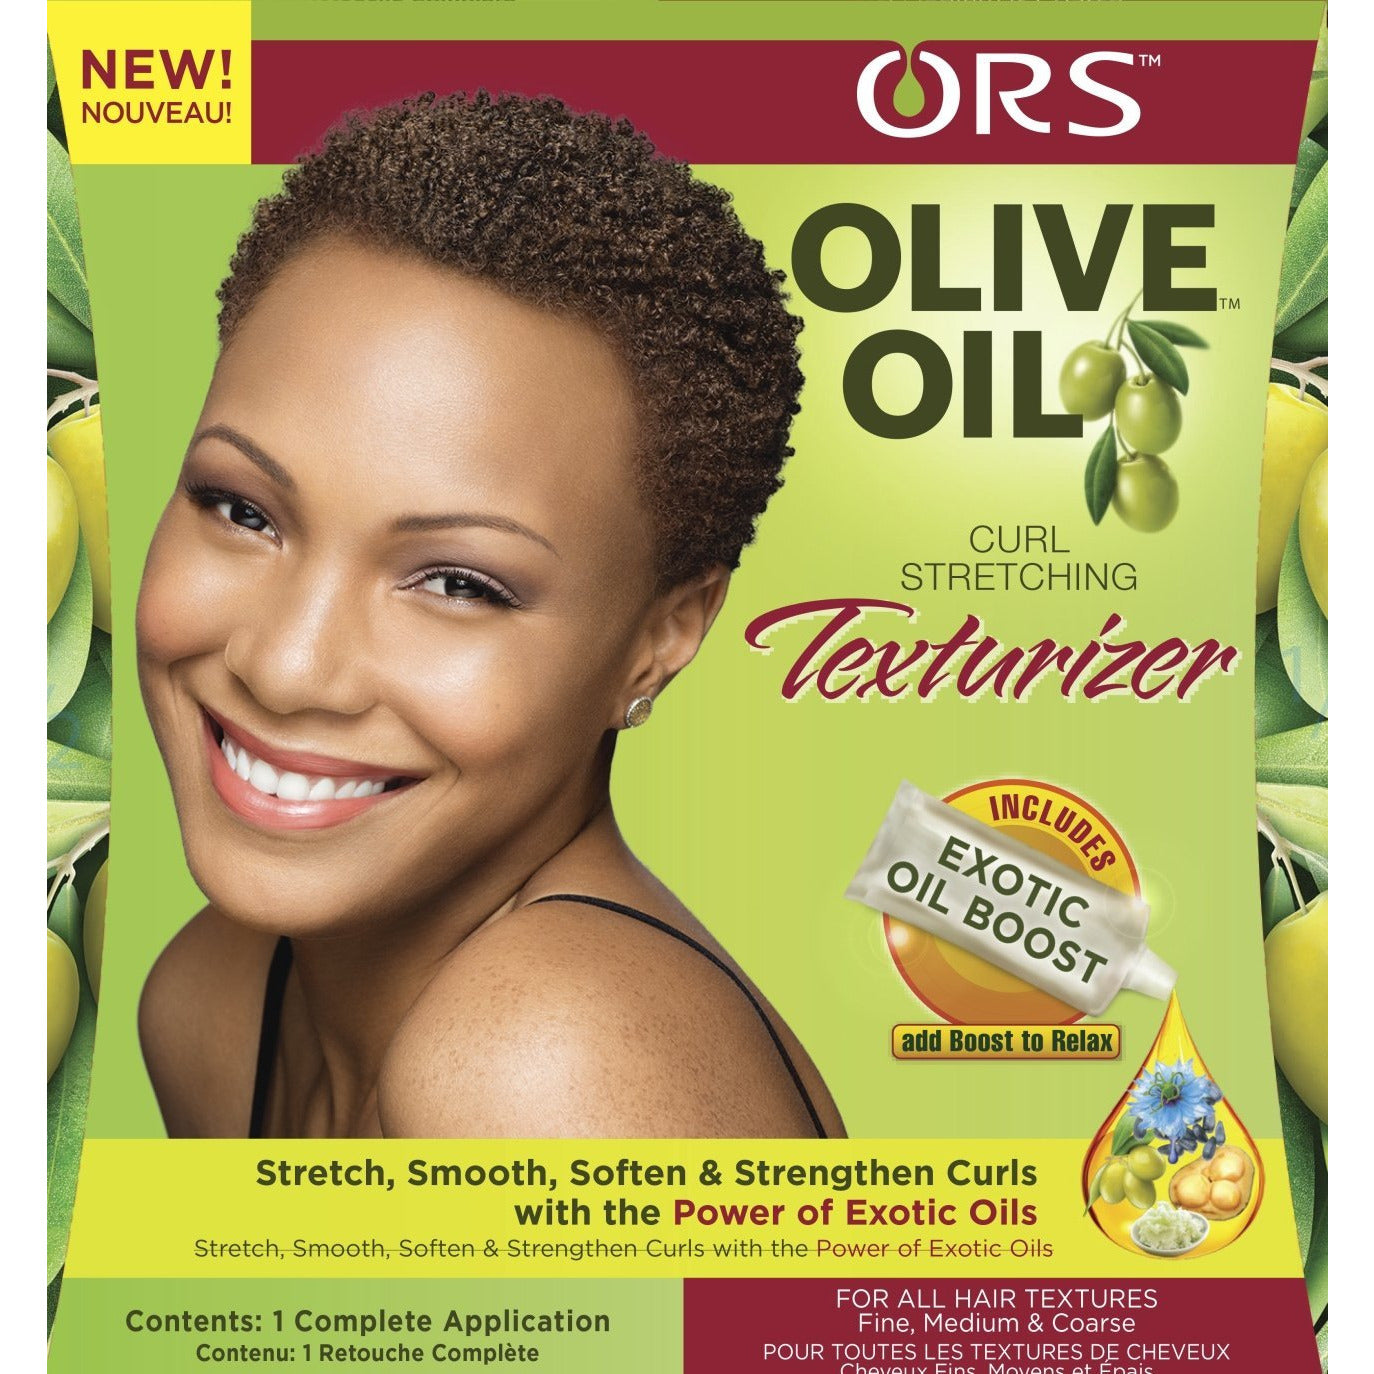 ORS Olive Oil Incredibly Rich Oil Moisturizing Hair Lotion 1 Oz